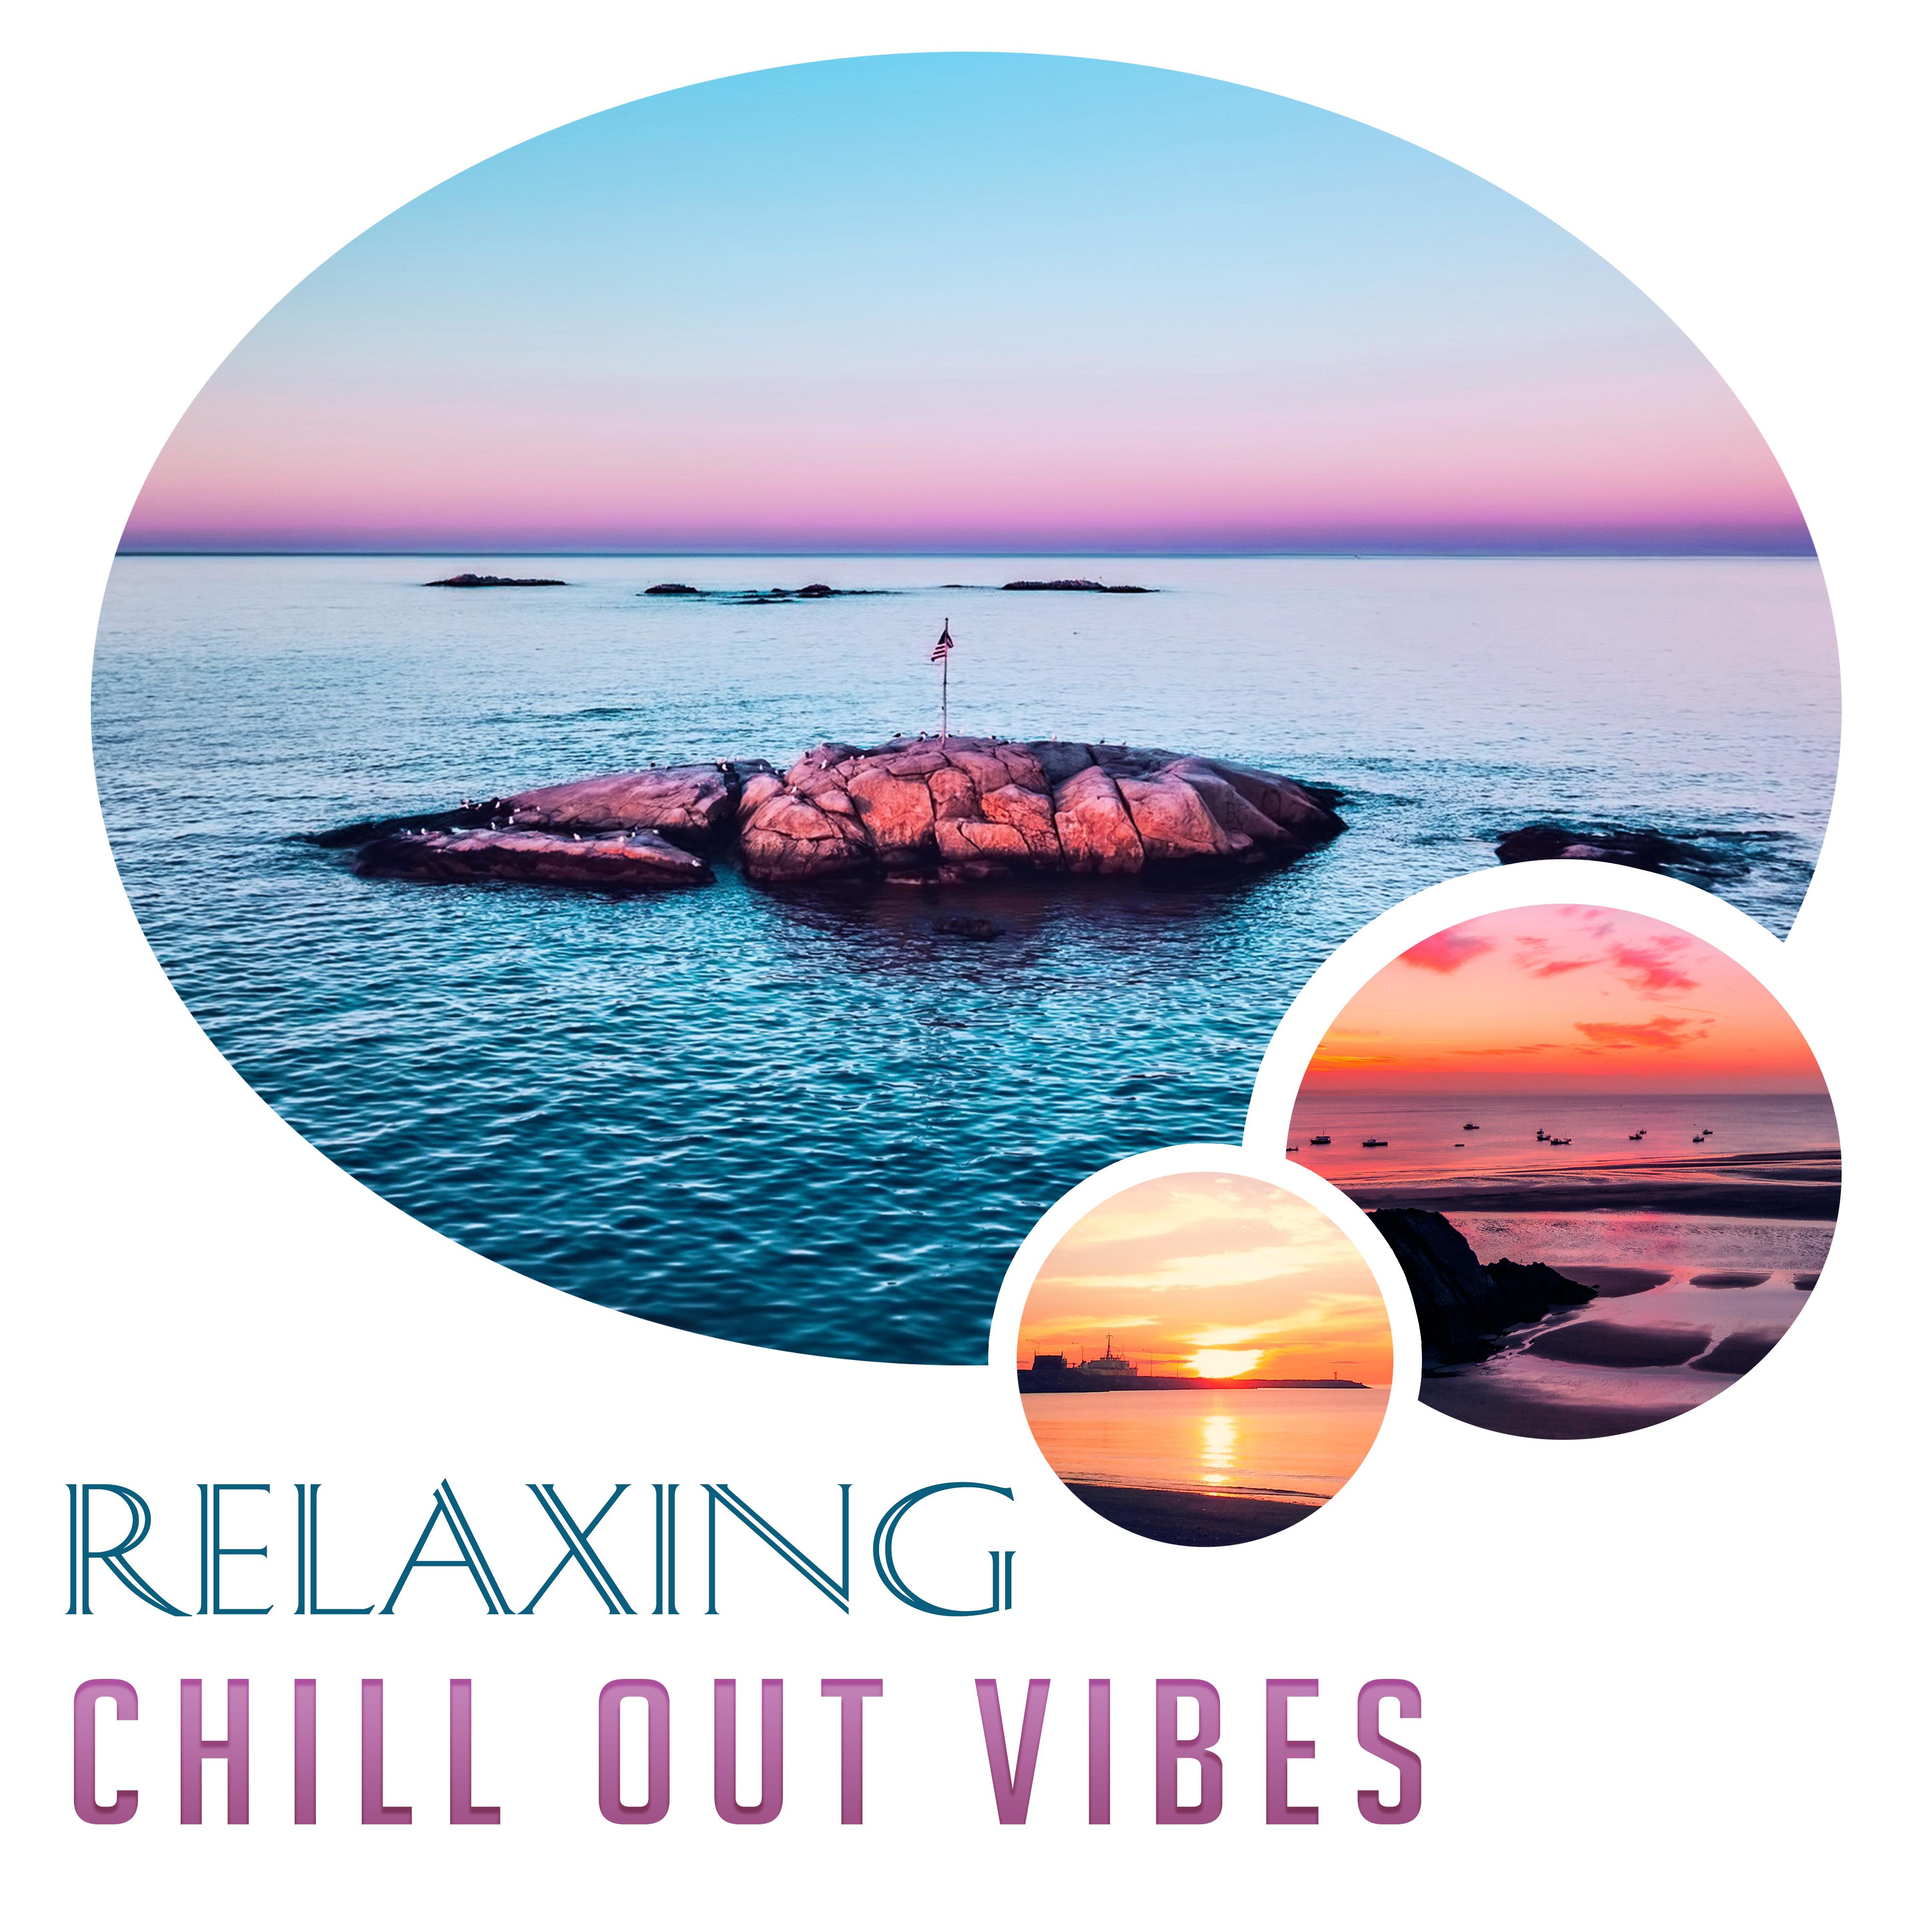 Relaxing Chill Out Vibes – Stress Relief, Bahama Chill Out, Summer Rest, Holiday Music, Tropical Island